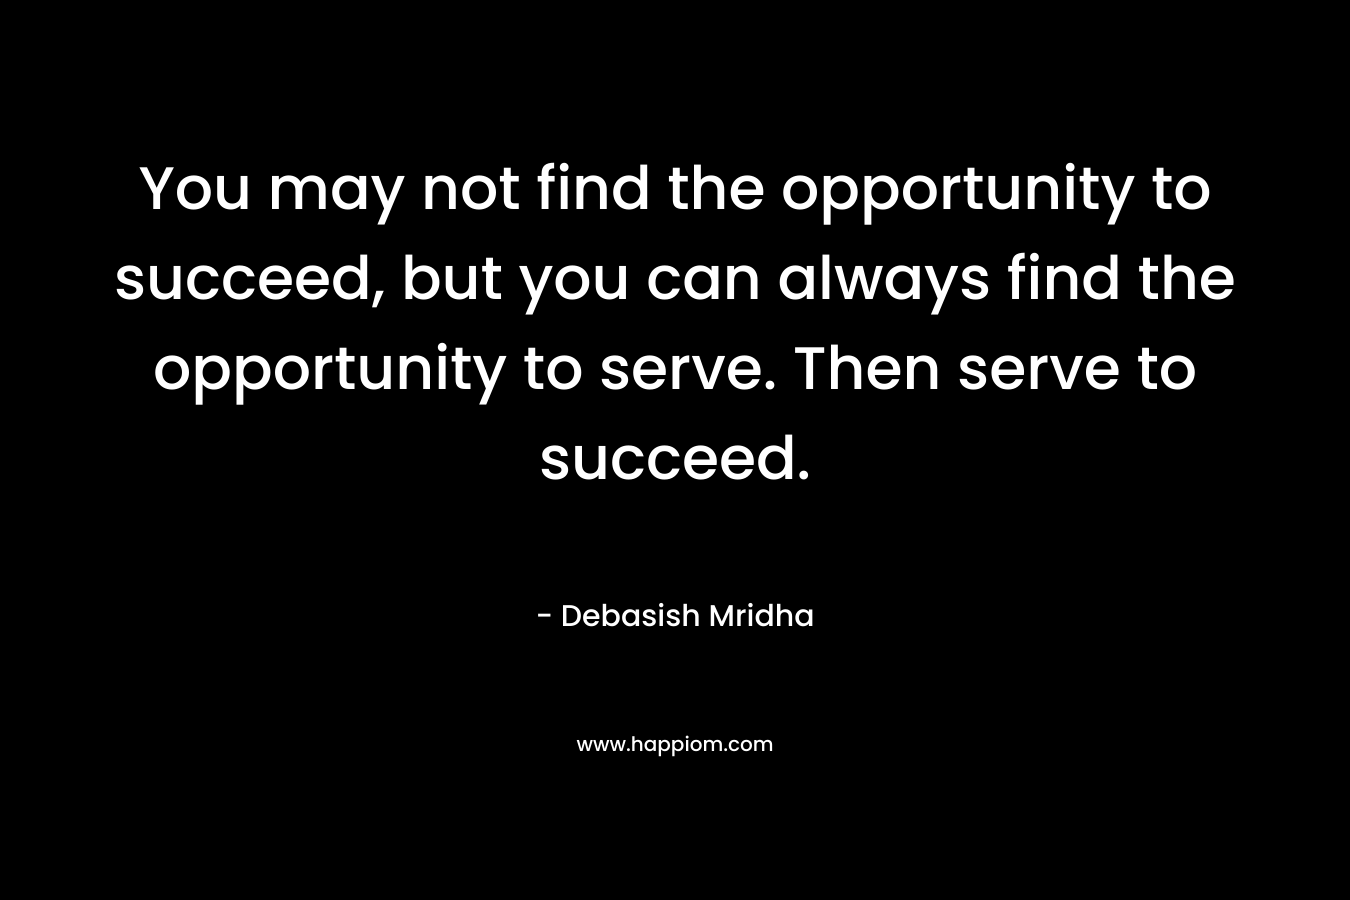 You may not find the opportunity to succeed, but you can always find the opportunity to serve. Then serve to succeed.